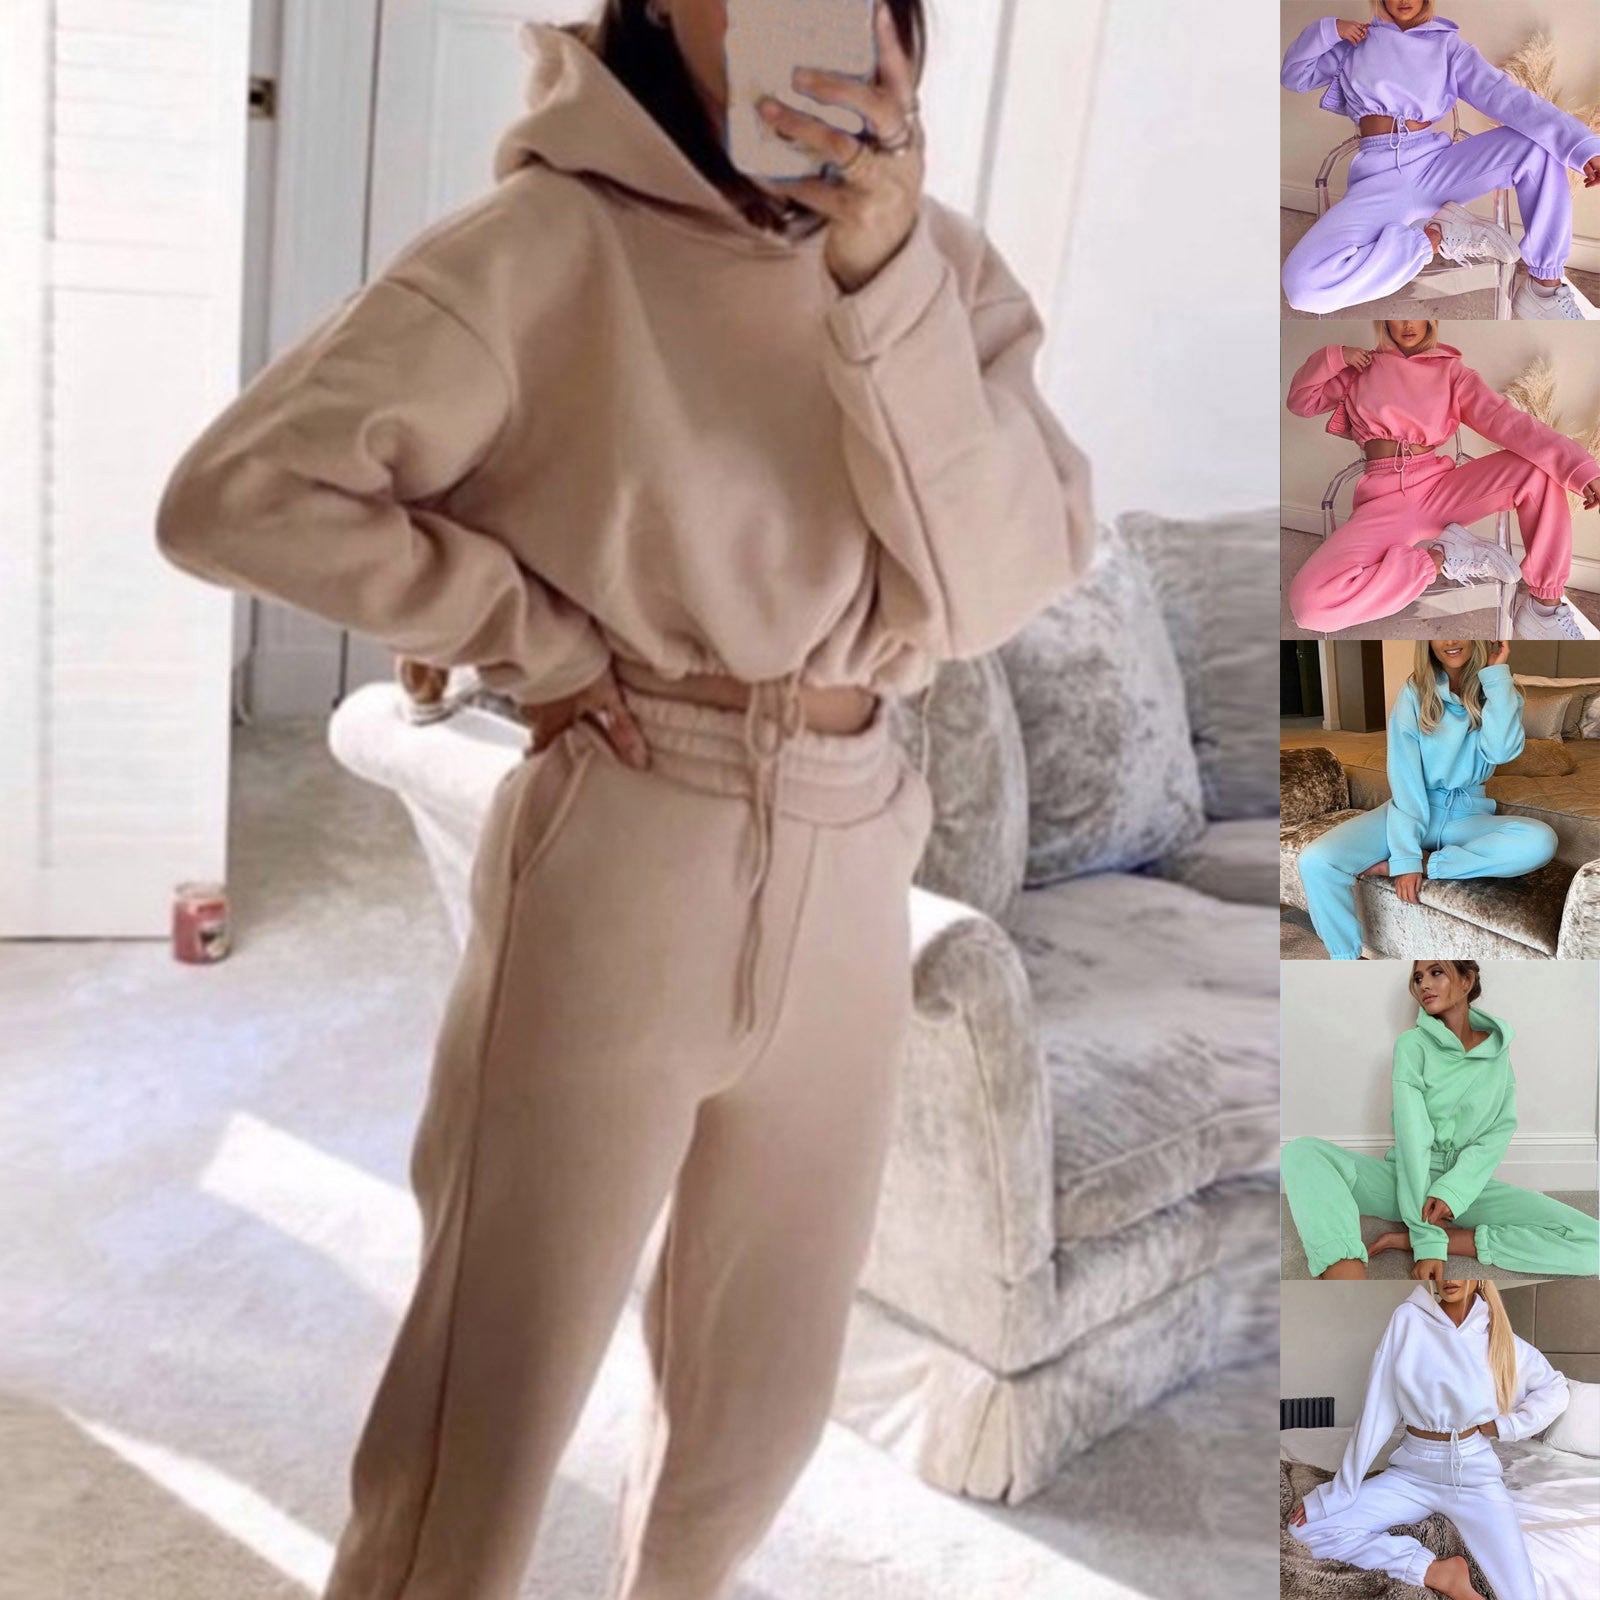 Lovemi -  Jogging Suits For Women 2 Piece Sweatsuits Tracksuits Sexy Long Sleeve HoodieCasual Fitness Sportswear